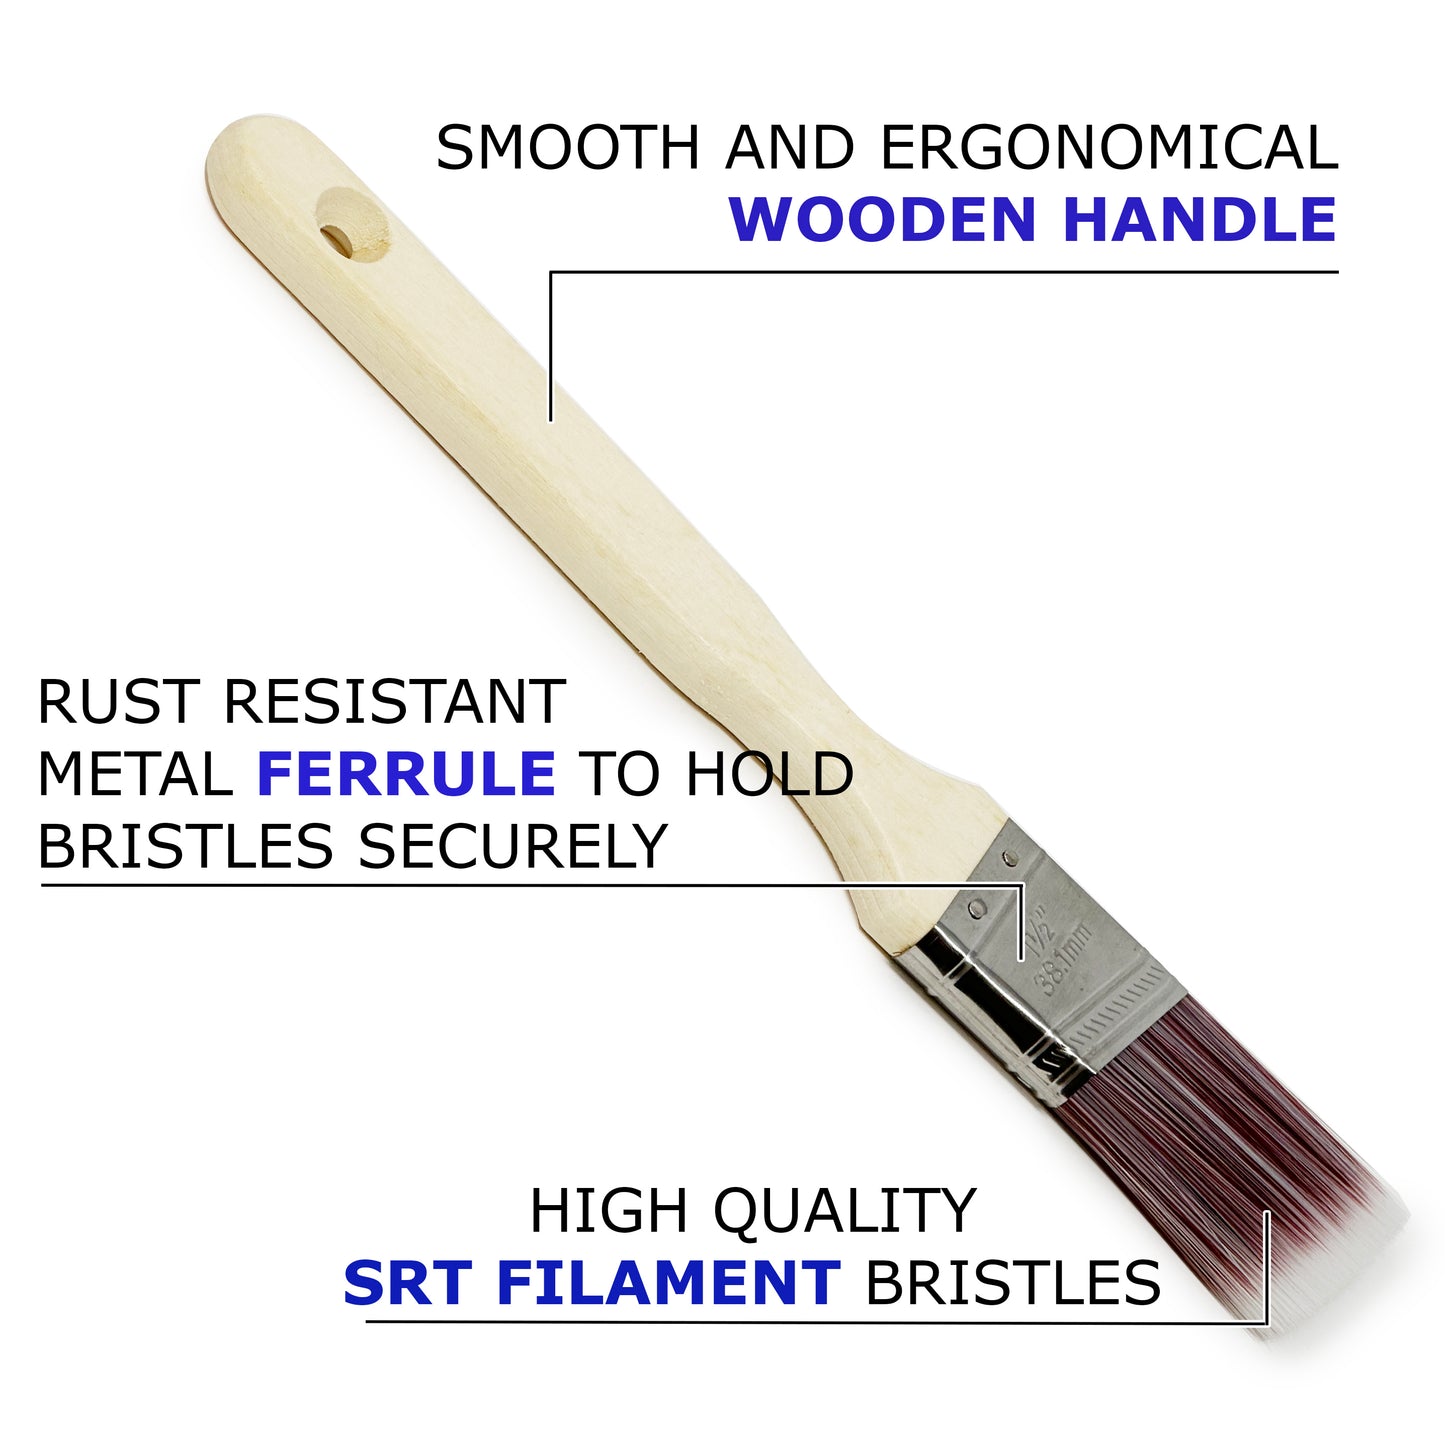 Allgala Paint Brushes 3-PK 1"+1.5"+2 Set for All Surface with Premium Wood Handle and Durable Filament Bristles